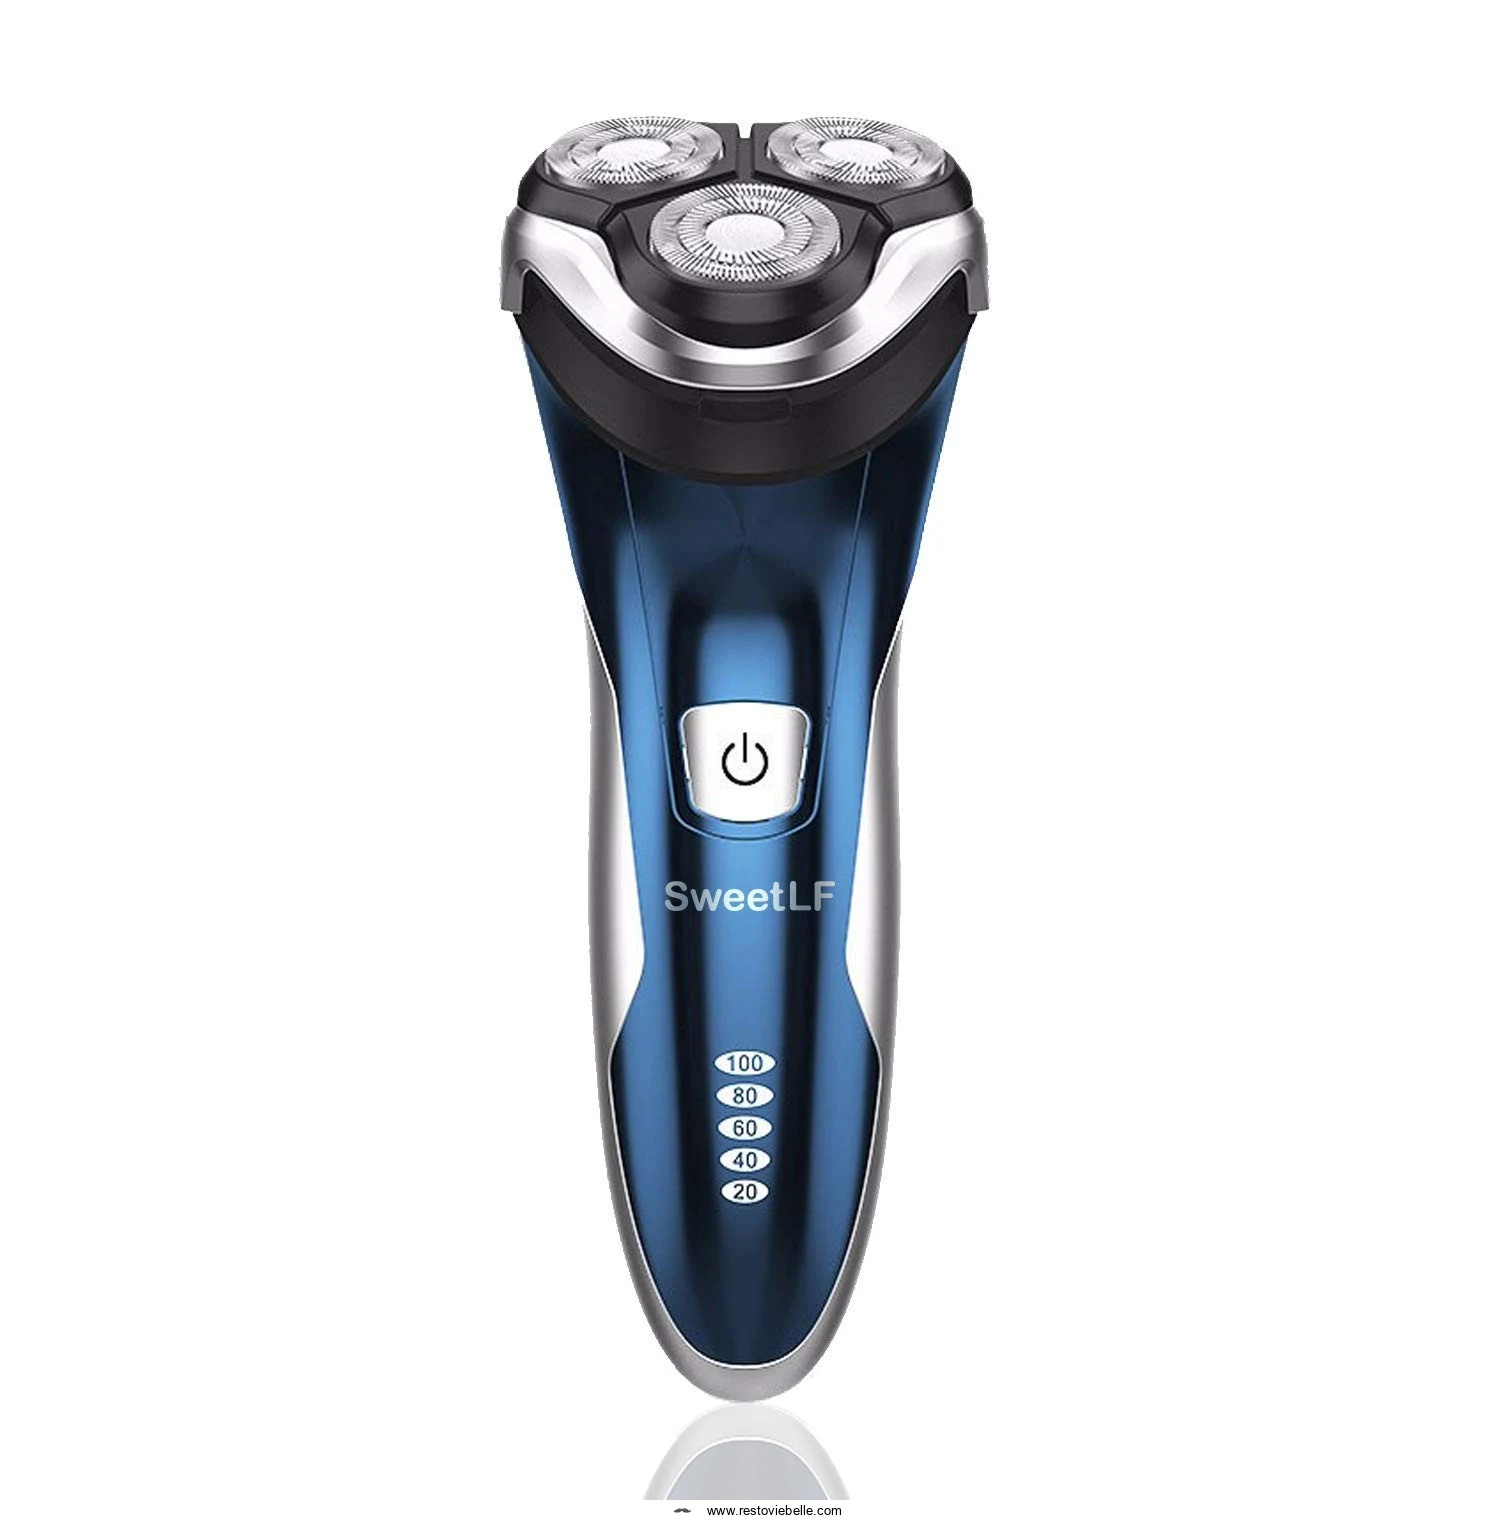 Sweetlf 3d Ipx7 Electric Shaver